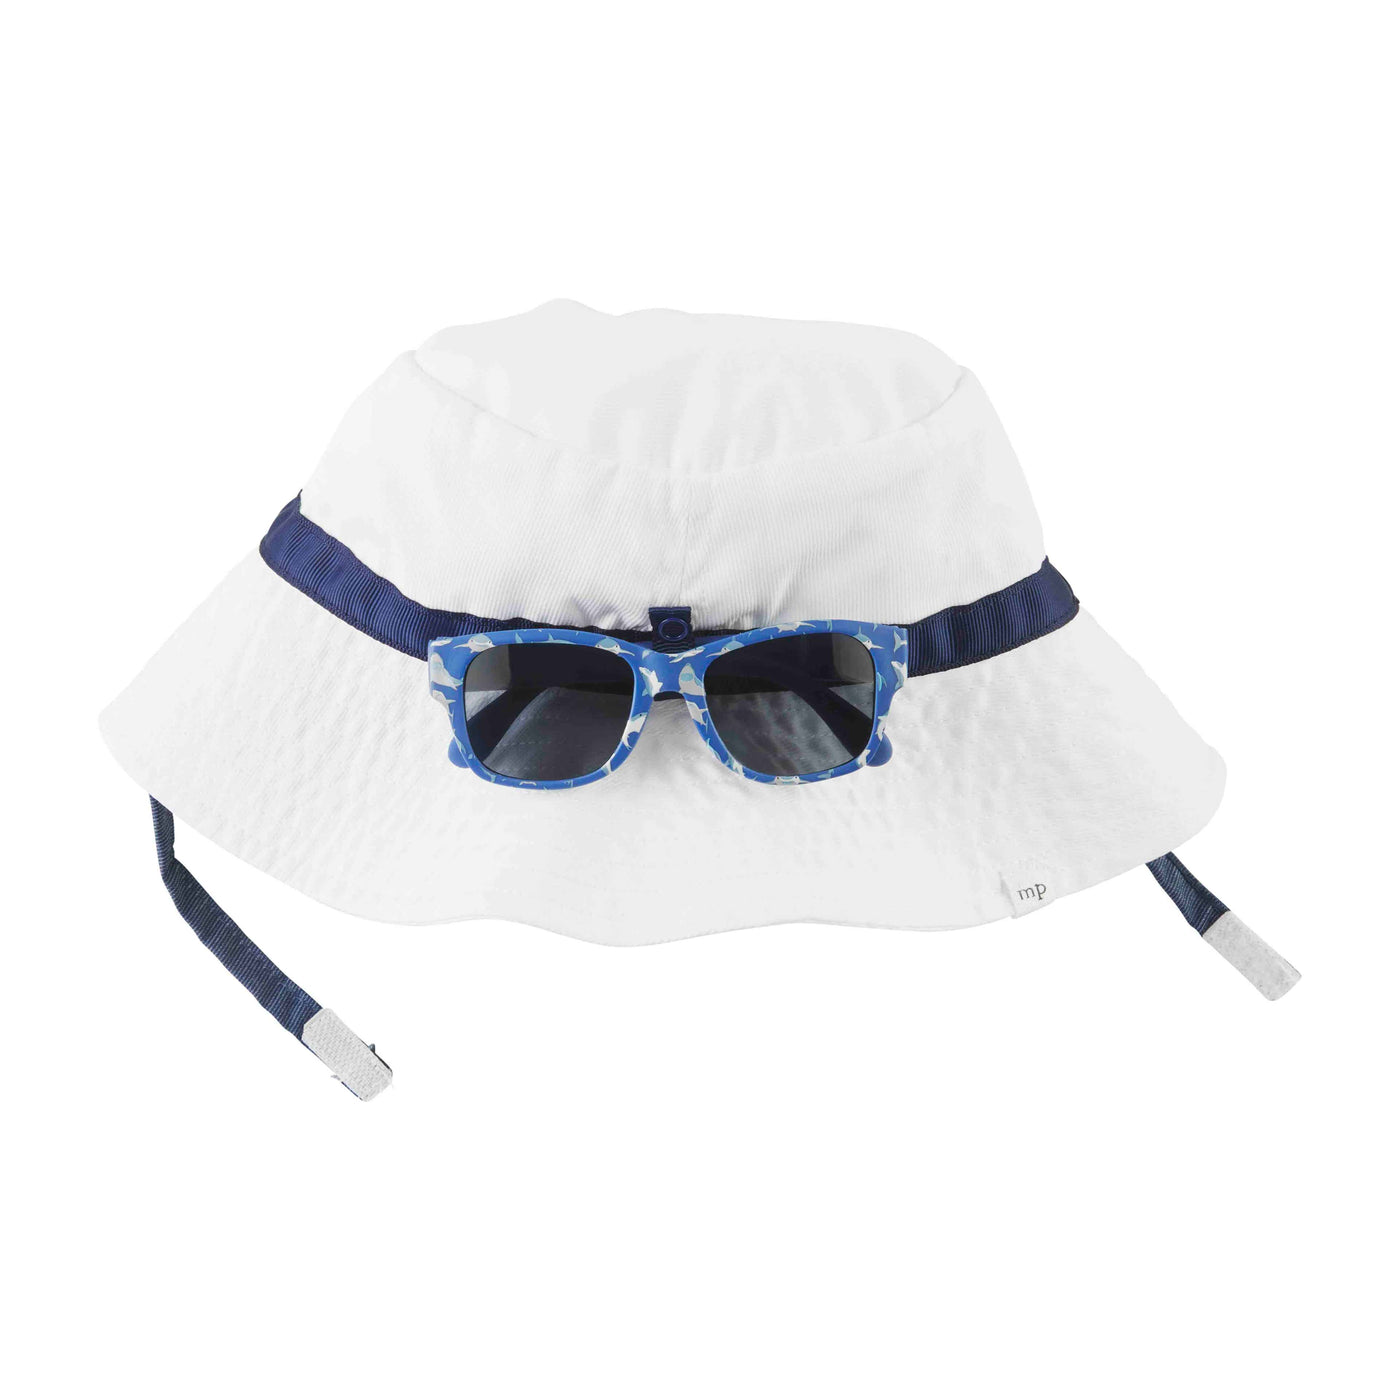 Toddler White Sun Hat And Sunglasses Set